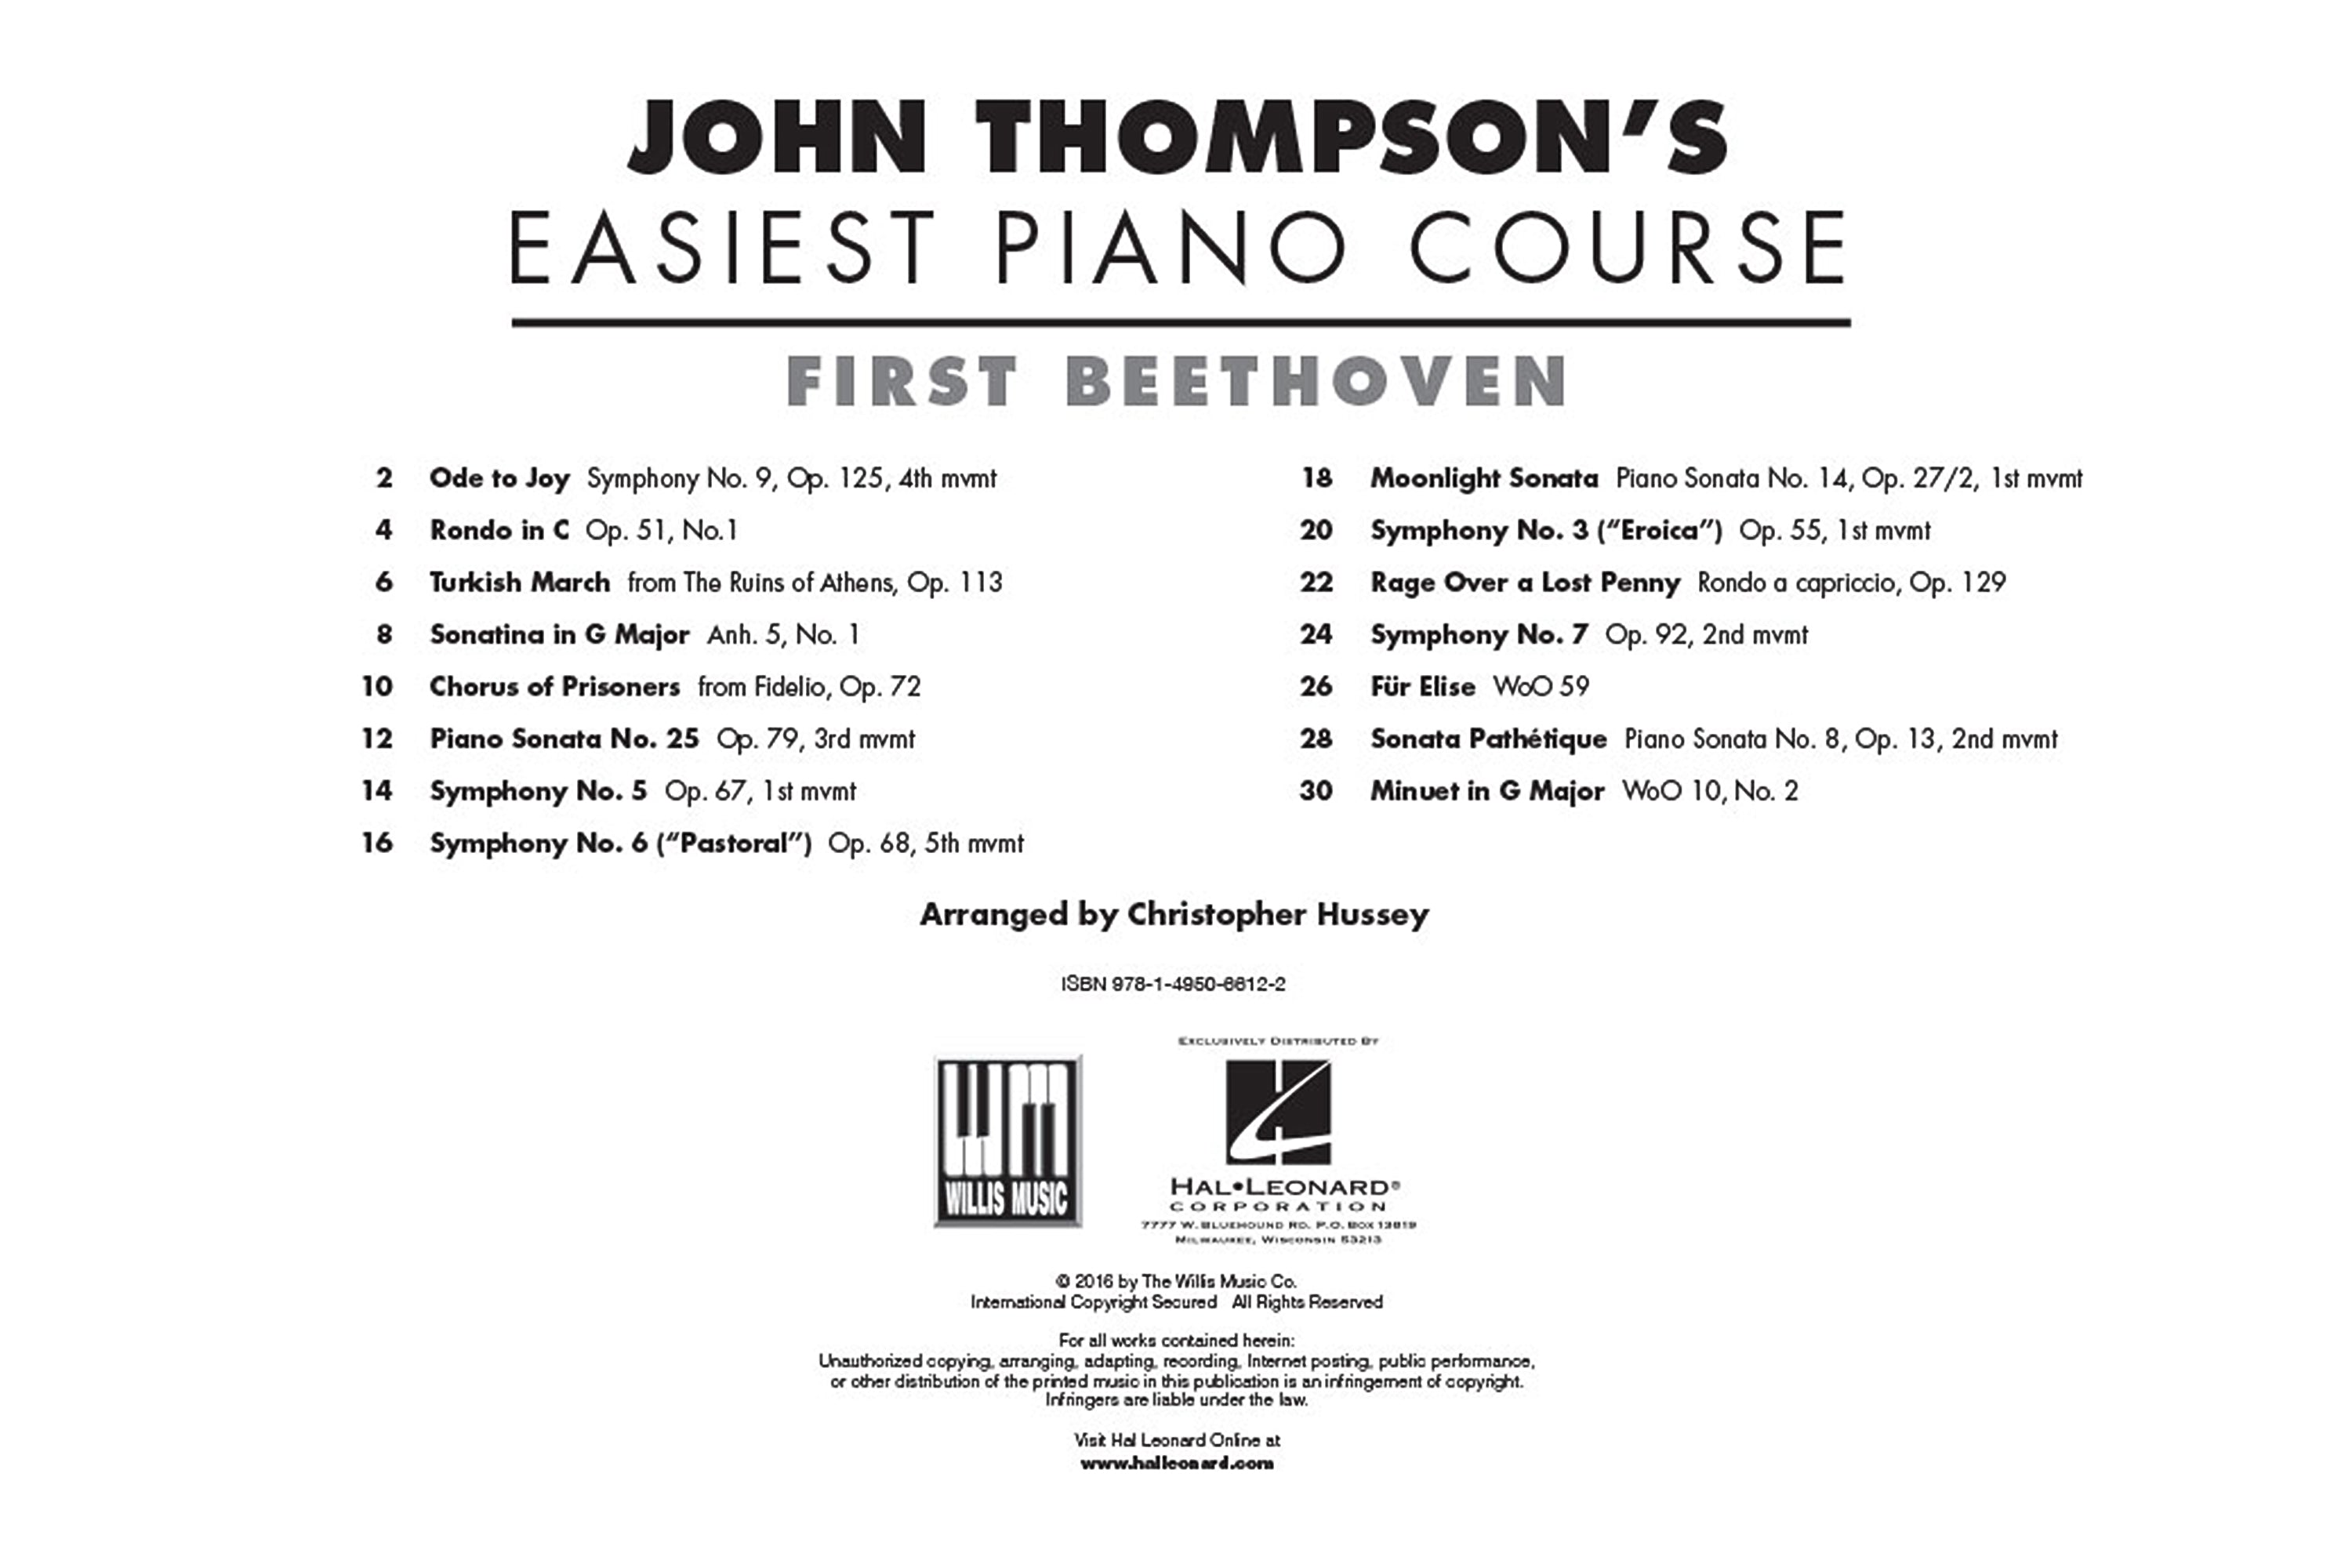 John Thompson's Easiest Piano Course - First Beethoven